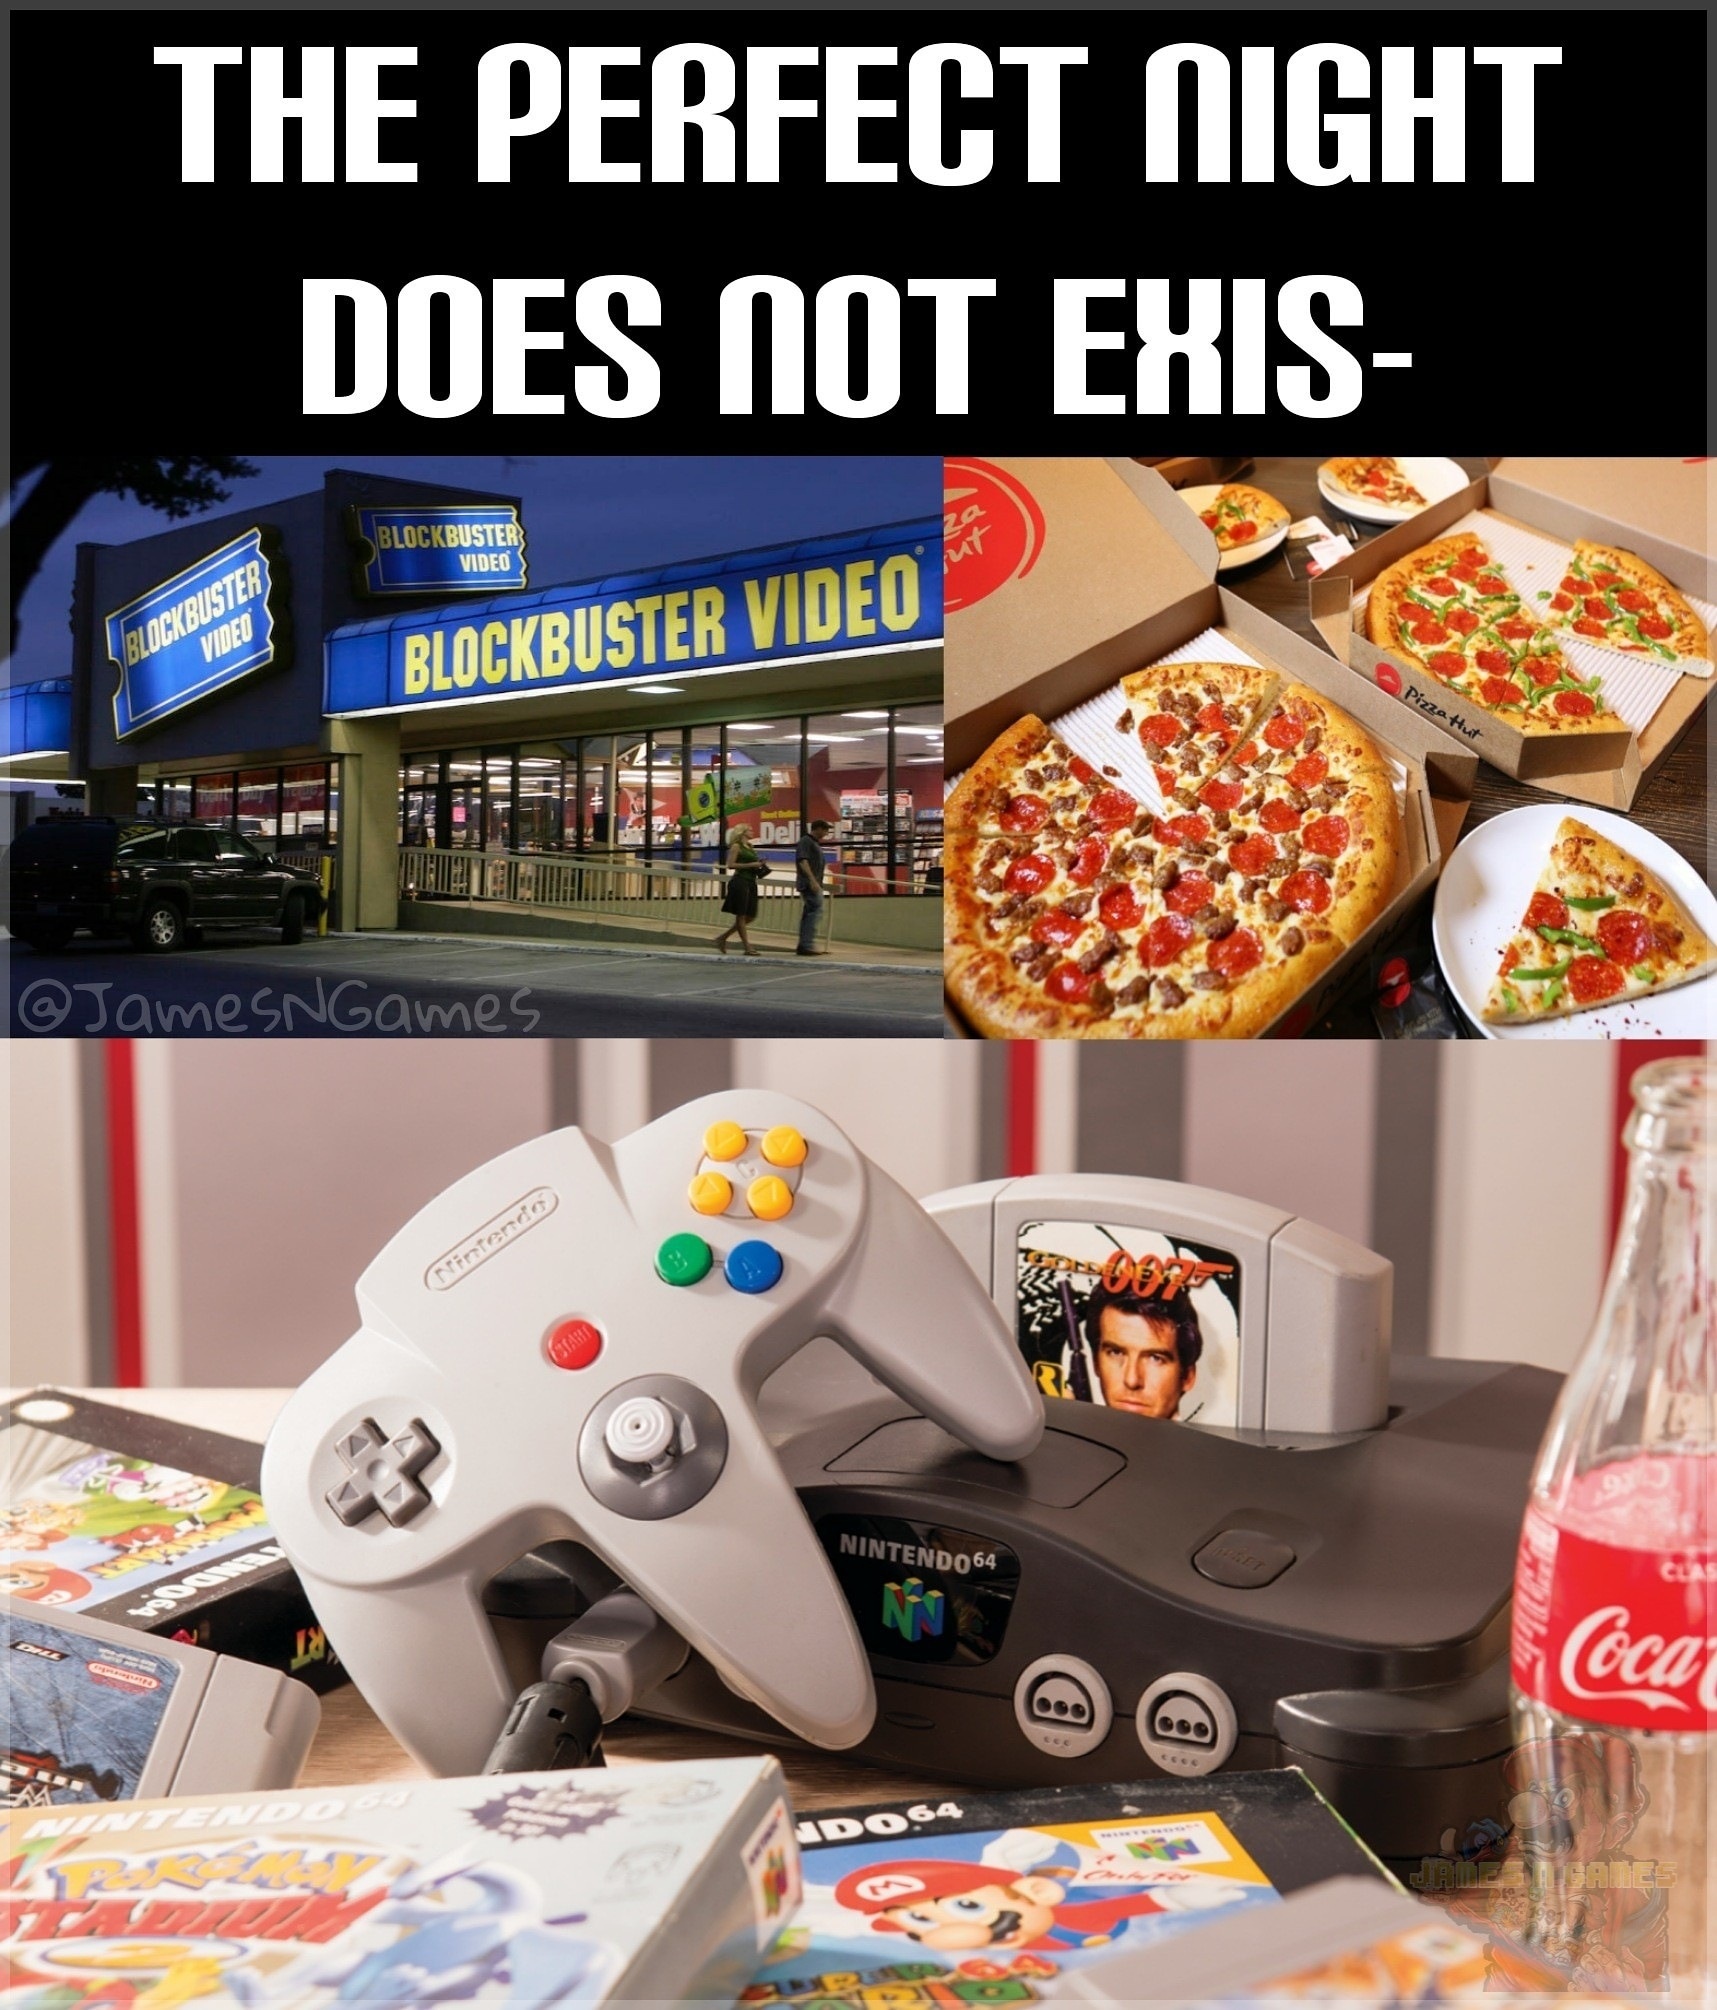 funny gaming memes - The Perfect Night Does Not Exis Ilala Vrsten Blockbuster Video JamesnGames Nintendo Cocar es Ados